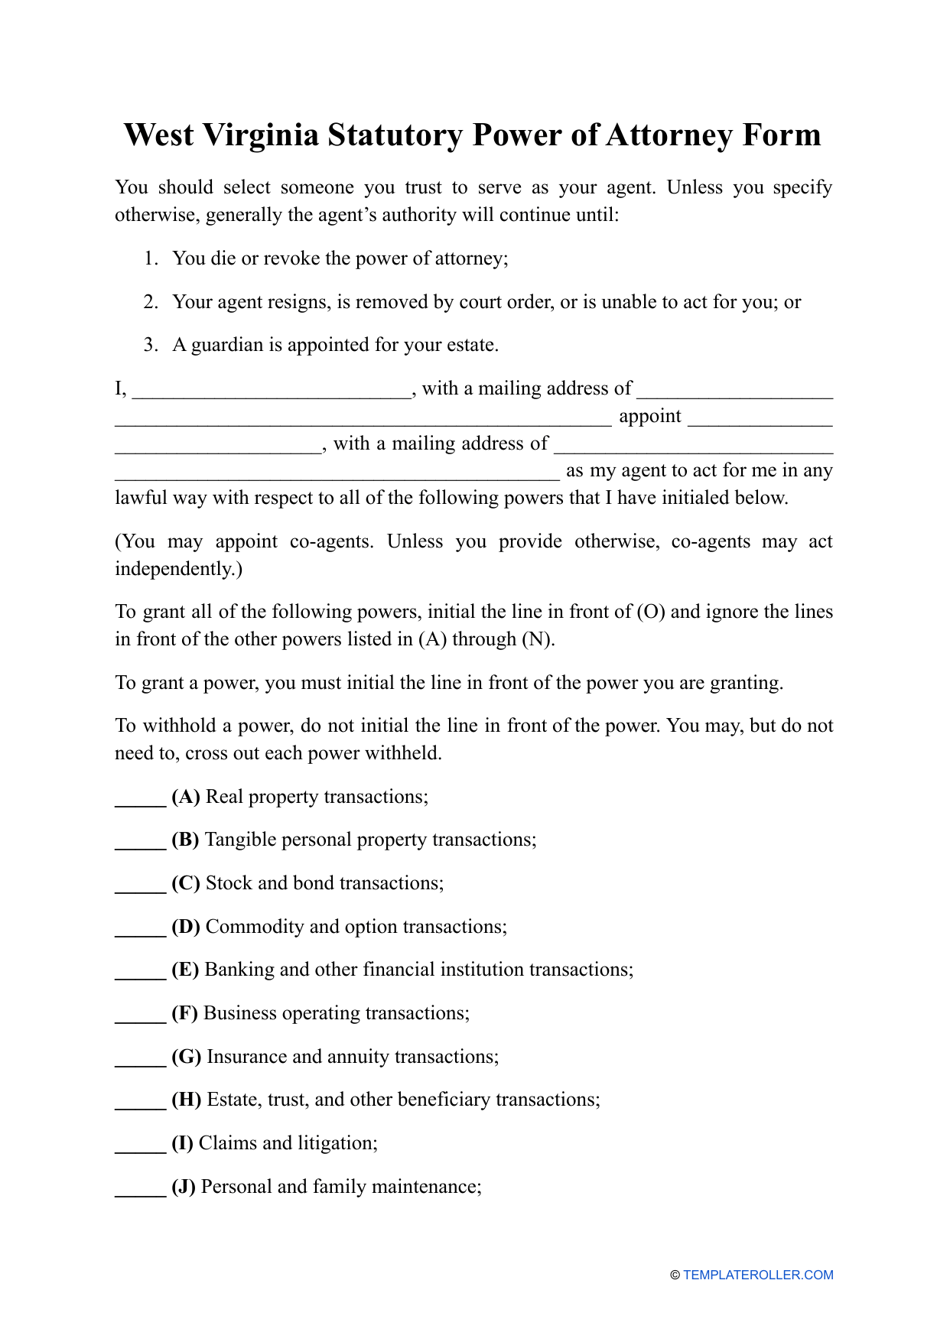 Statutory Power of Attorney Form - West Virginia, Page 1